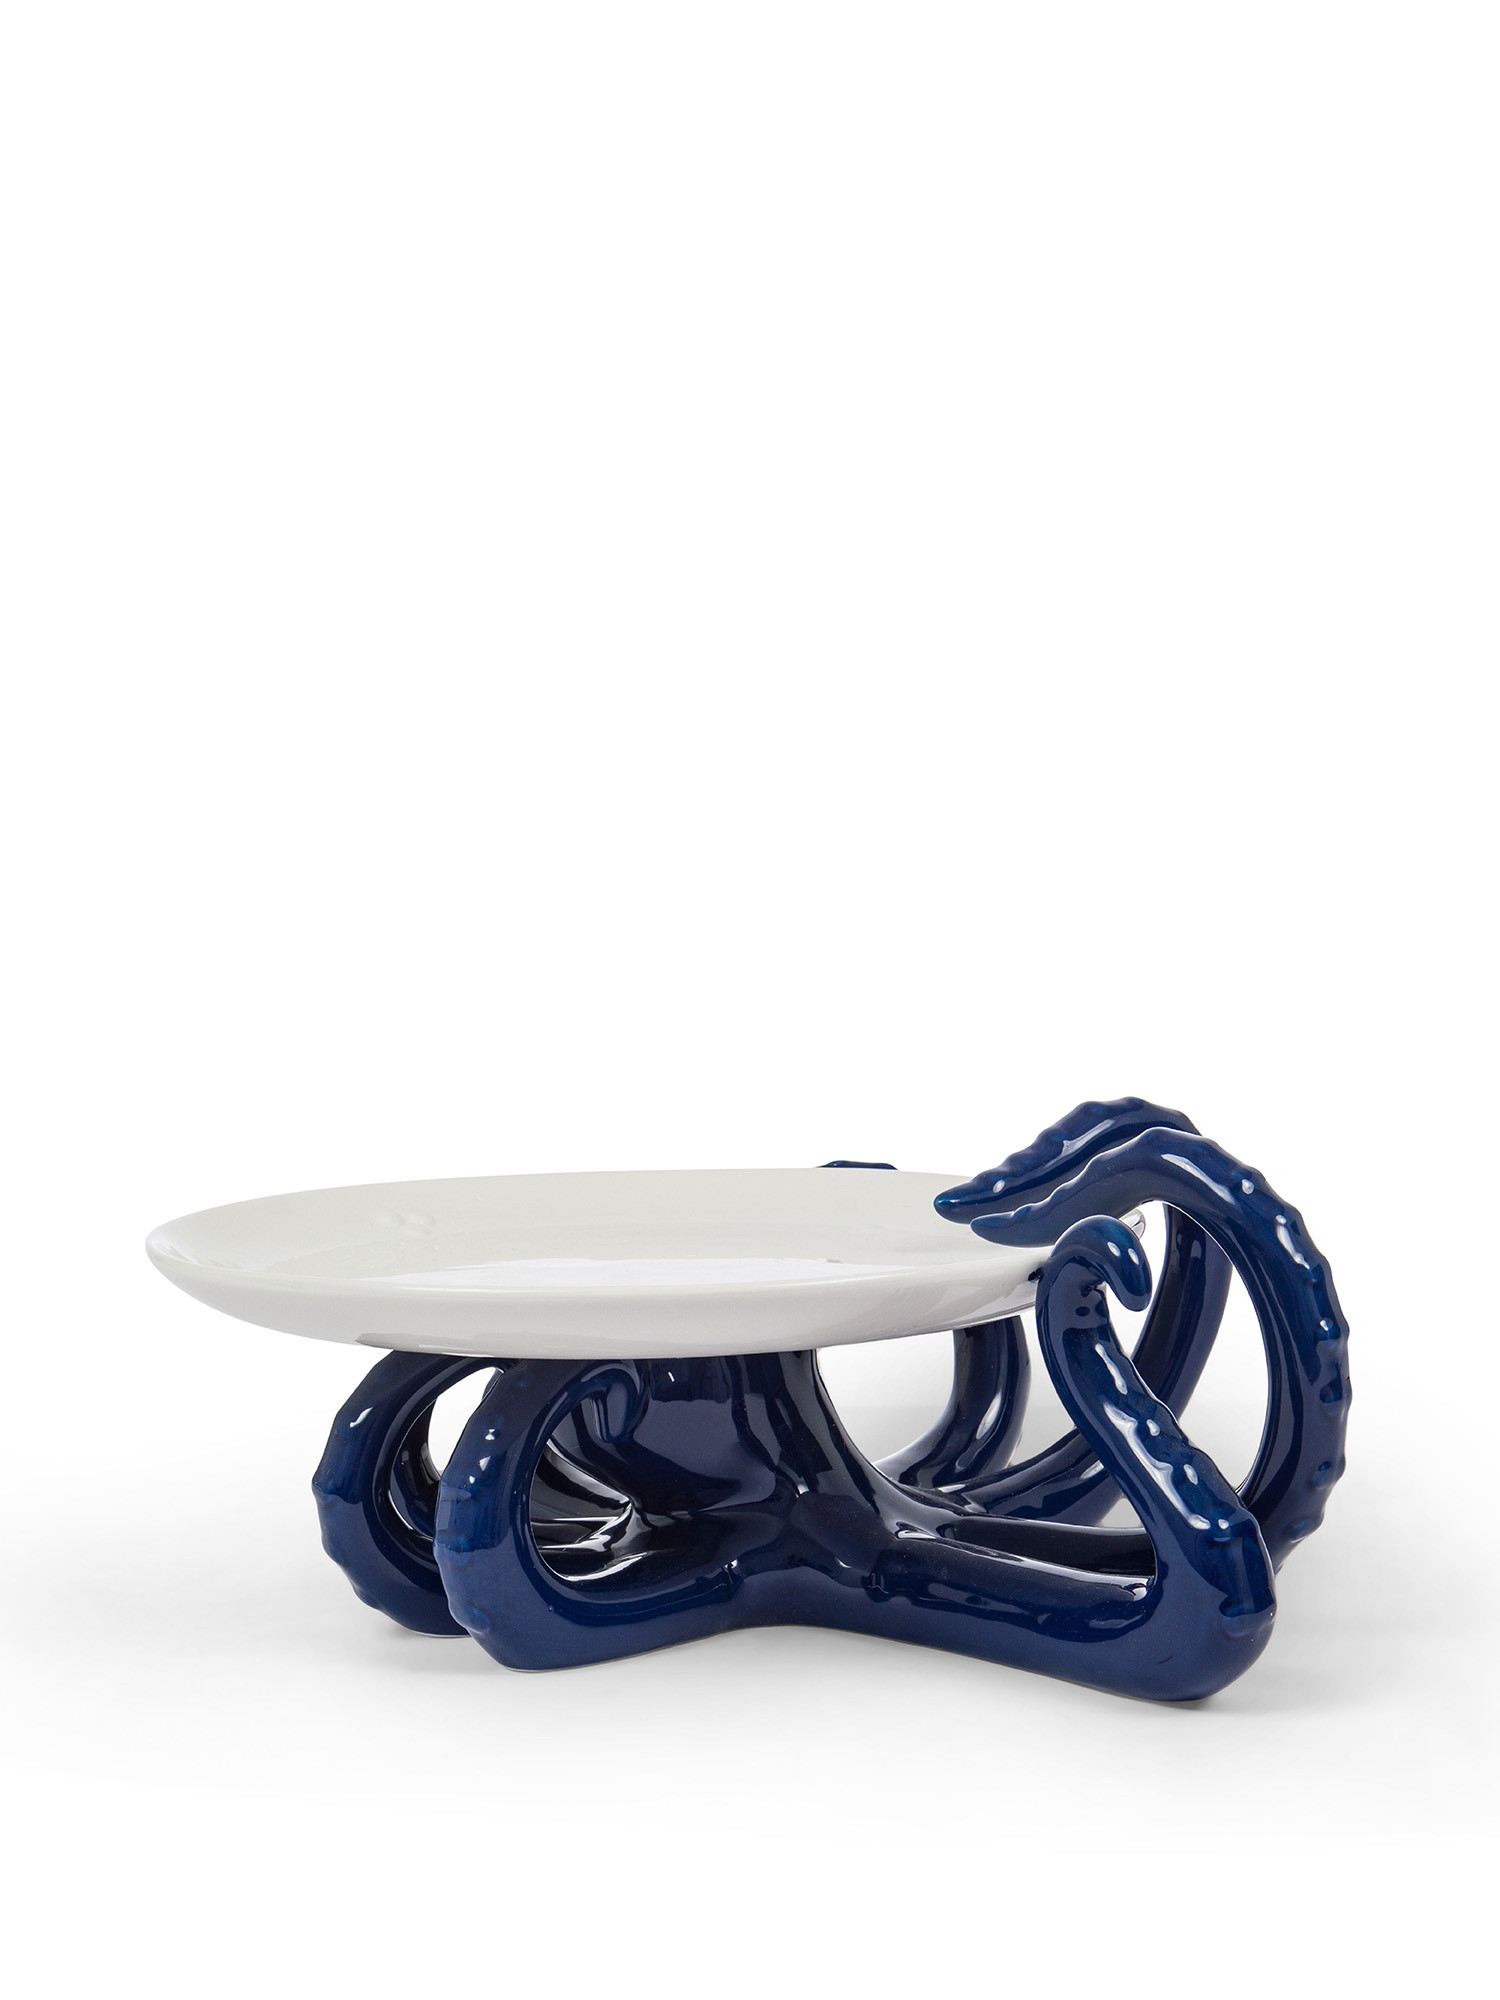 Octopus stand, White / Blue, large image number 0